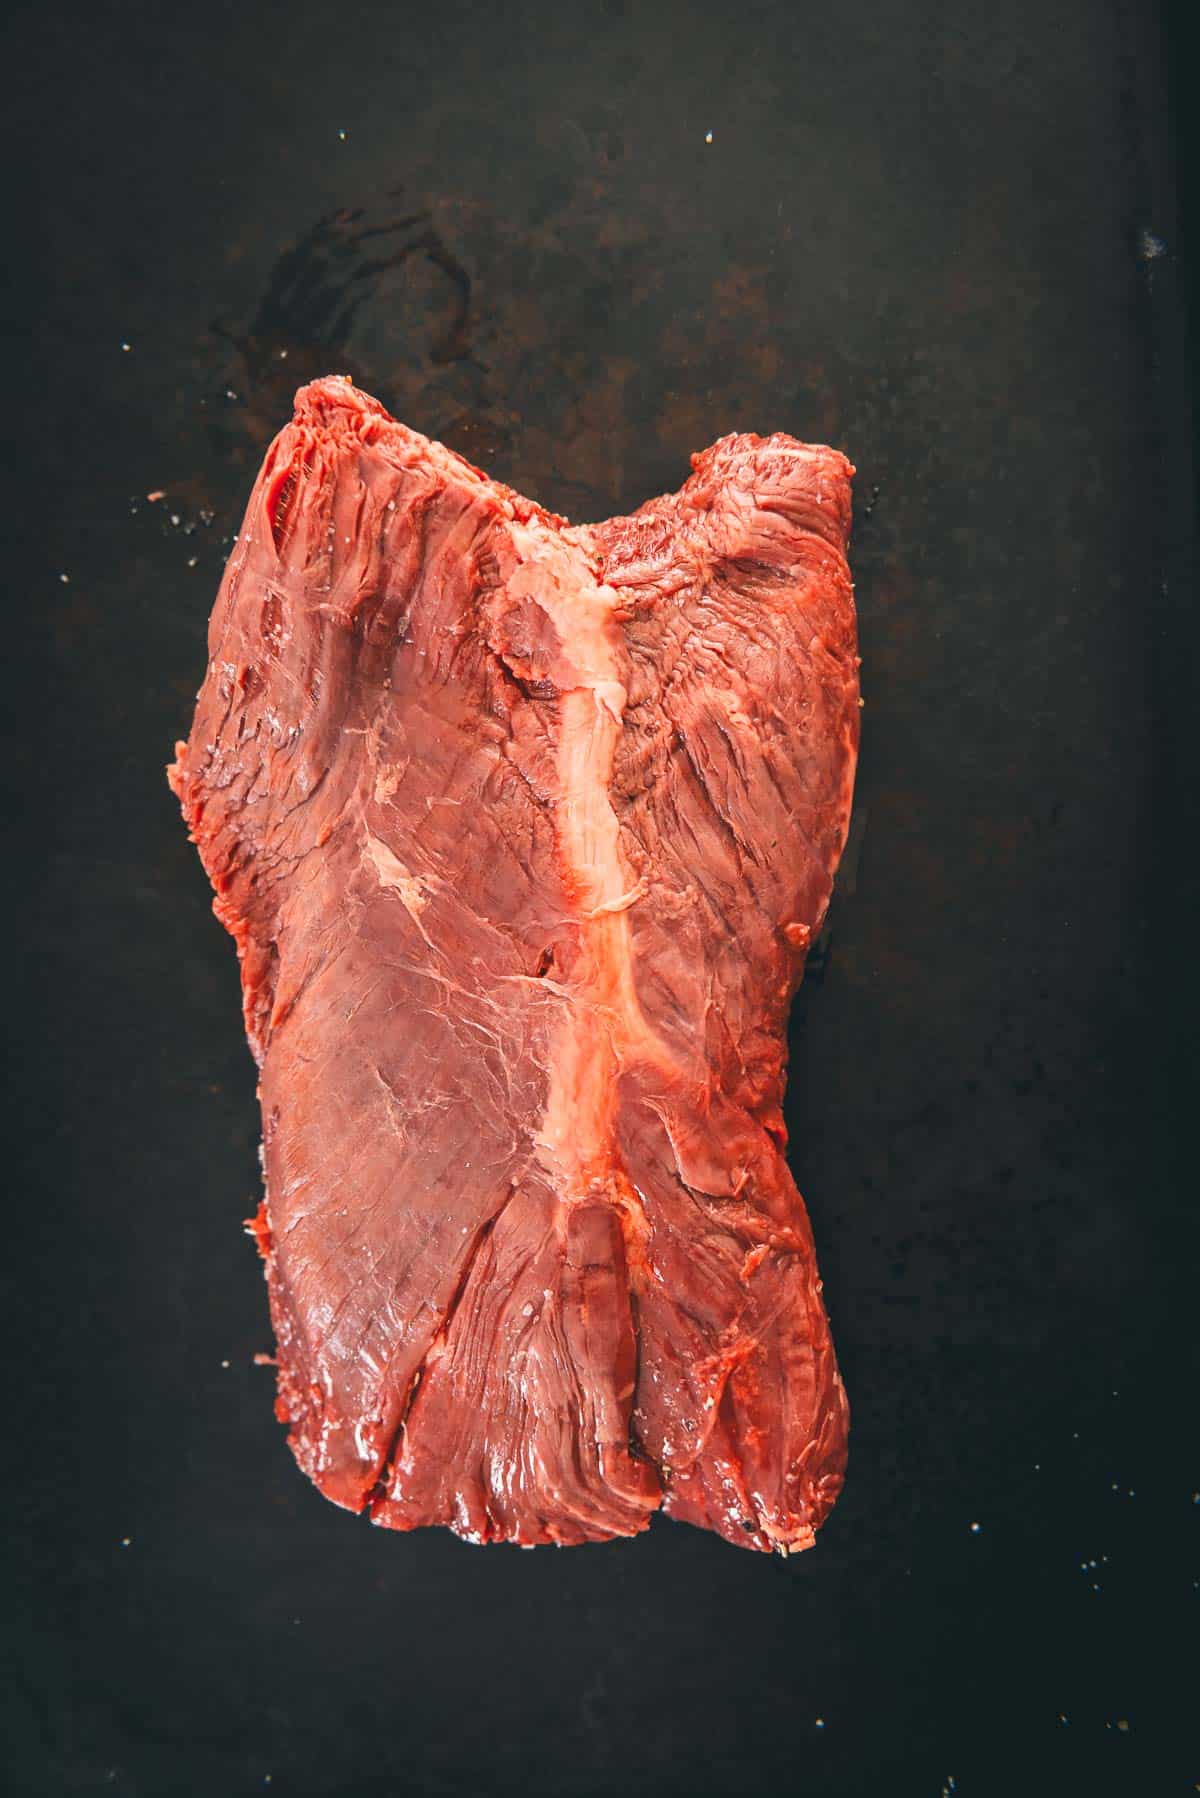 A piece of hanger steak on a black pan, showing signature connective tissue down the center.